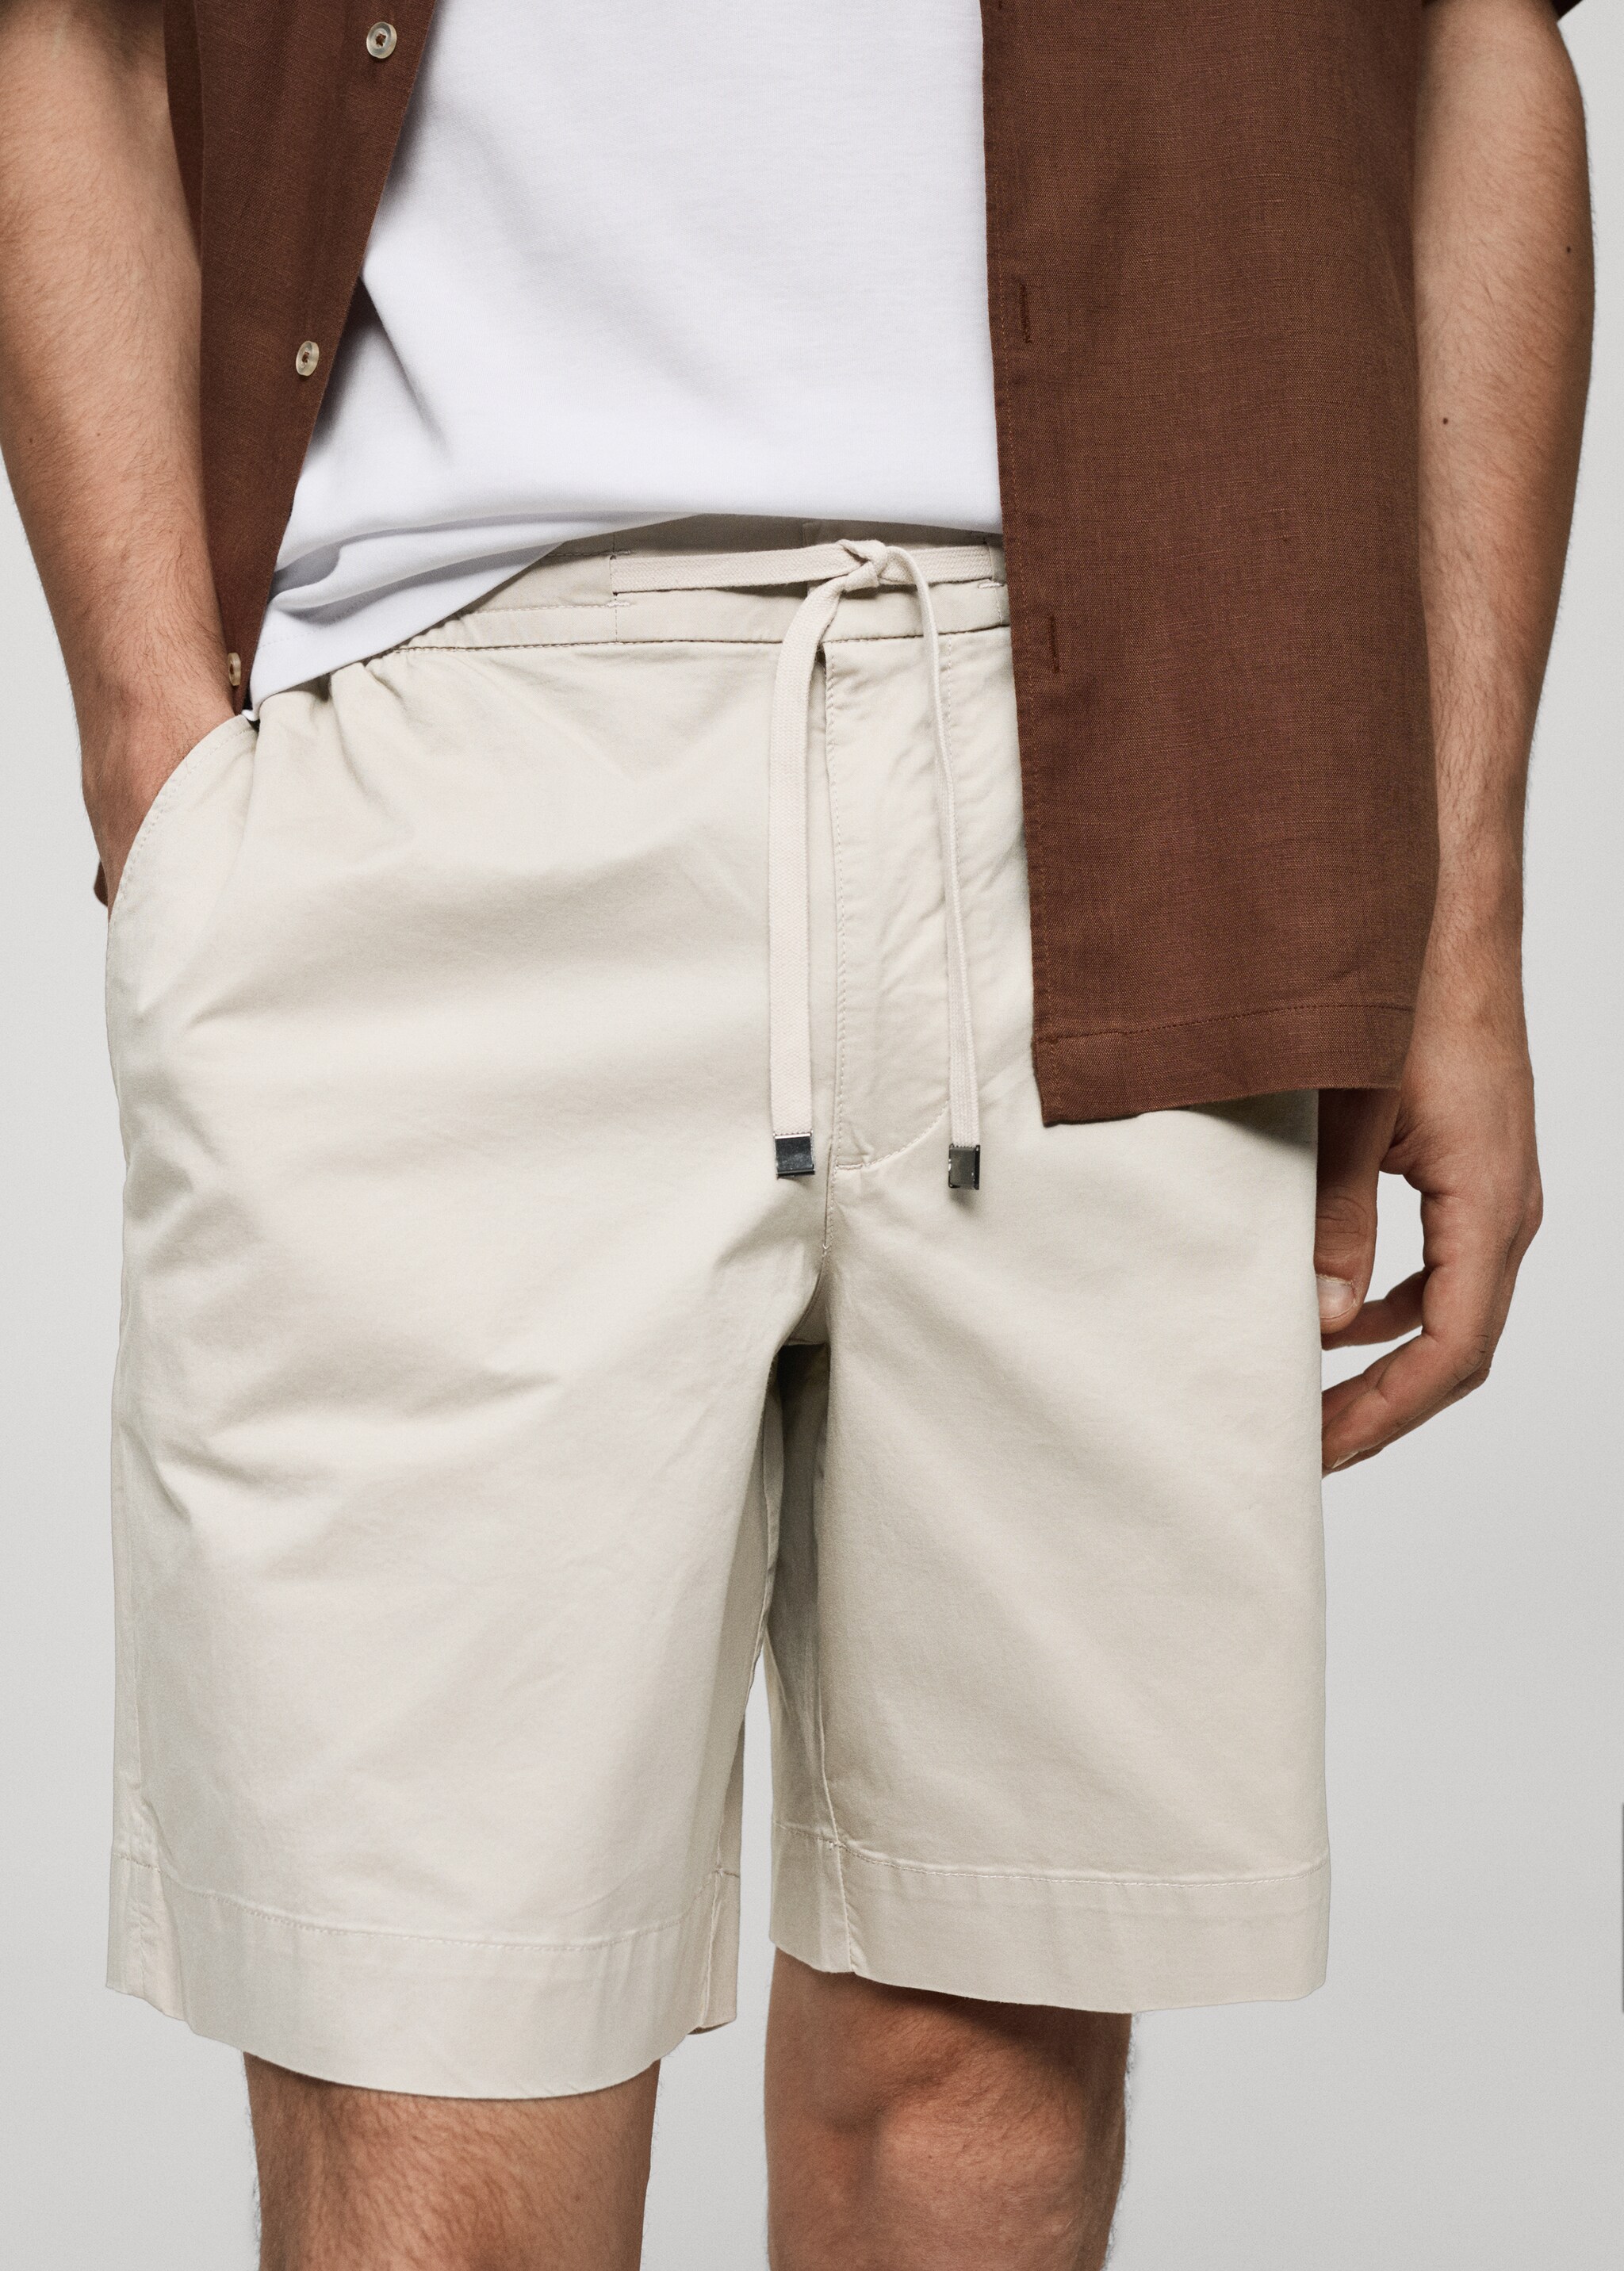 Slim fit cotton Bermuda shorts - Details of the article 1